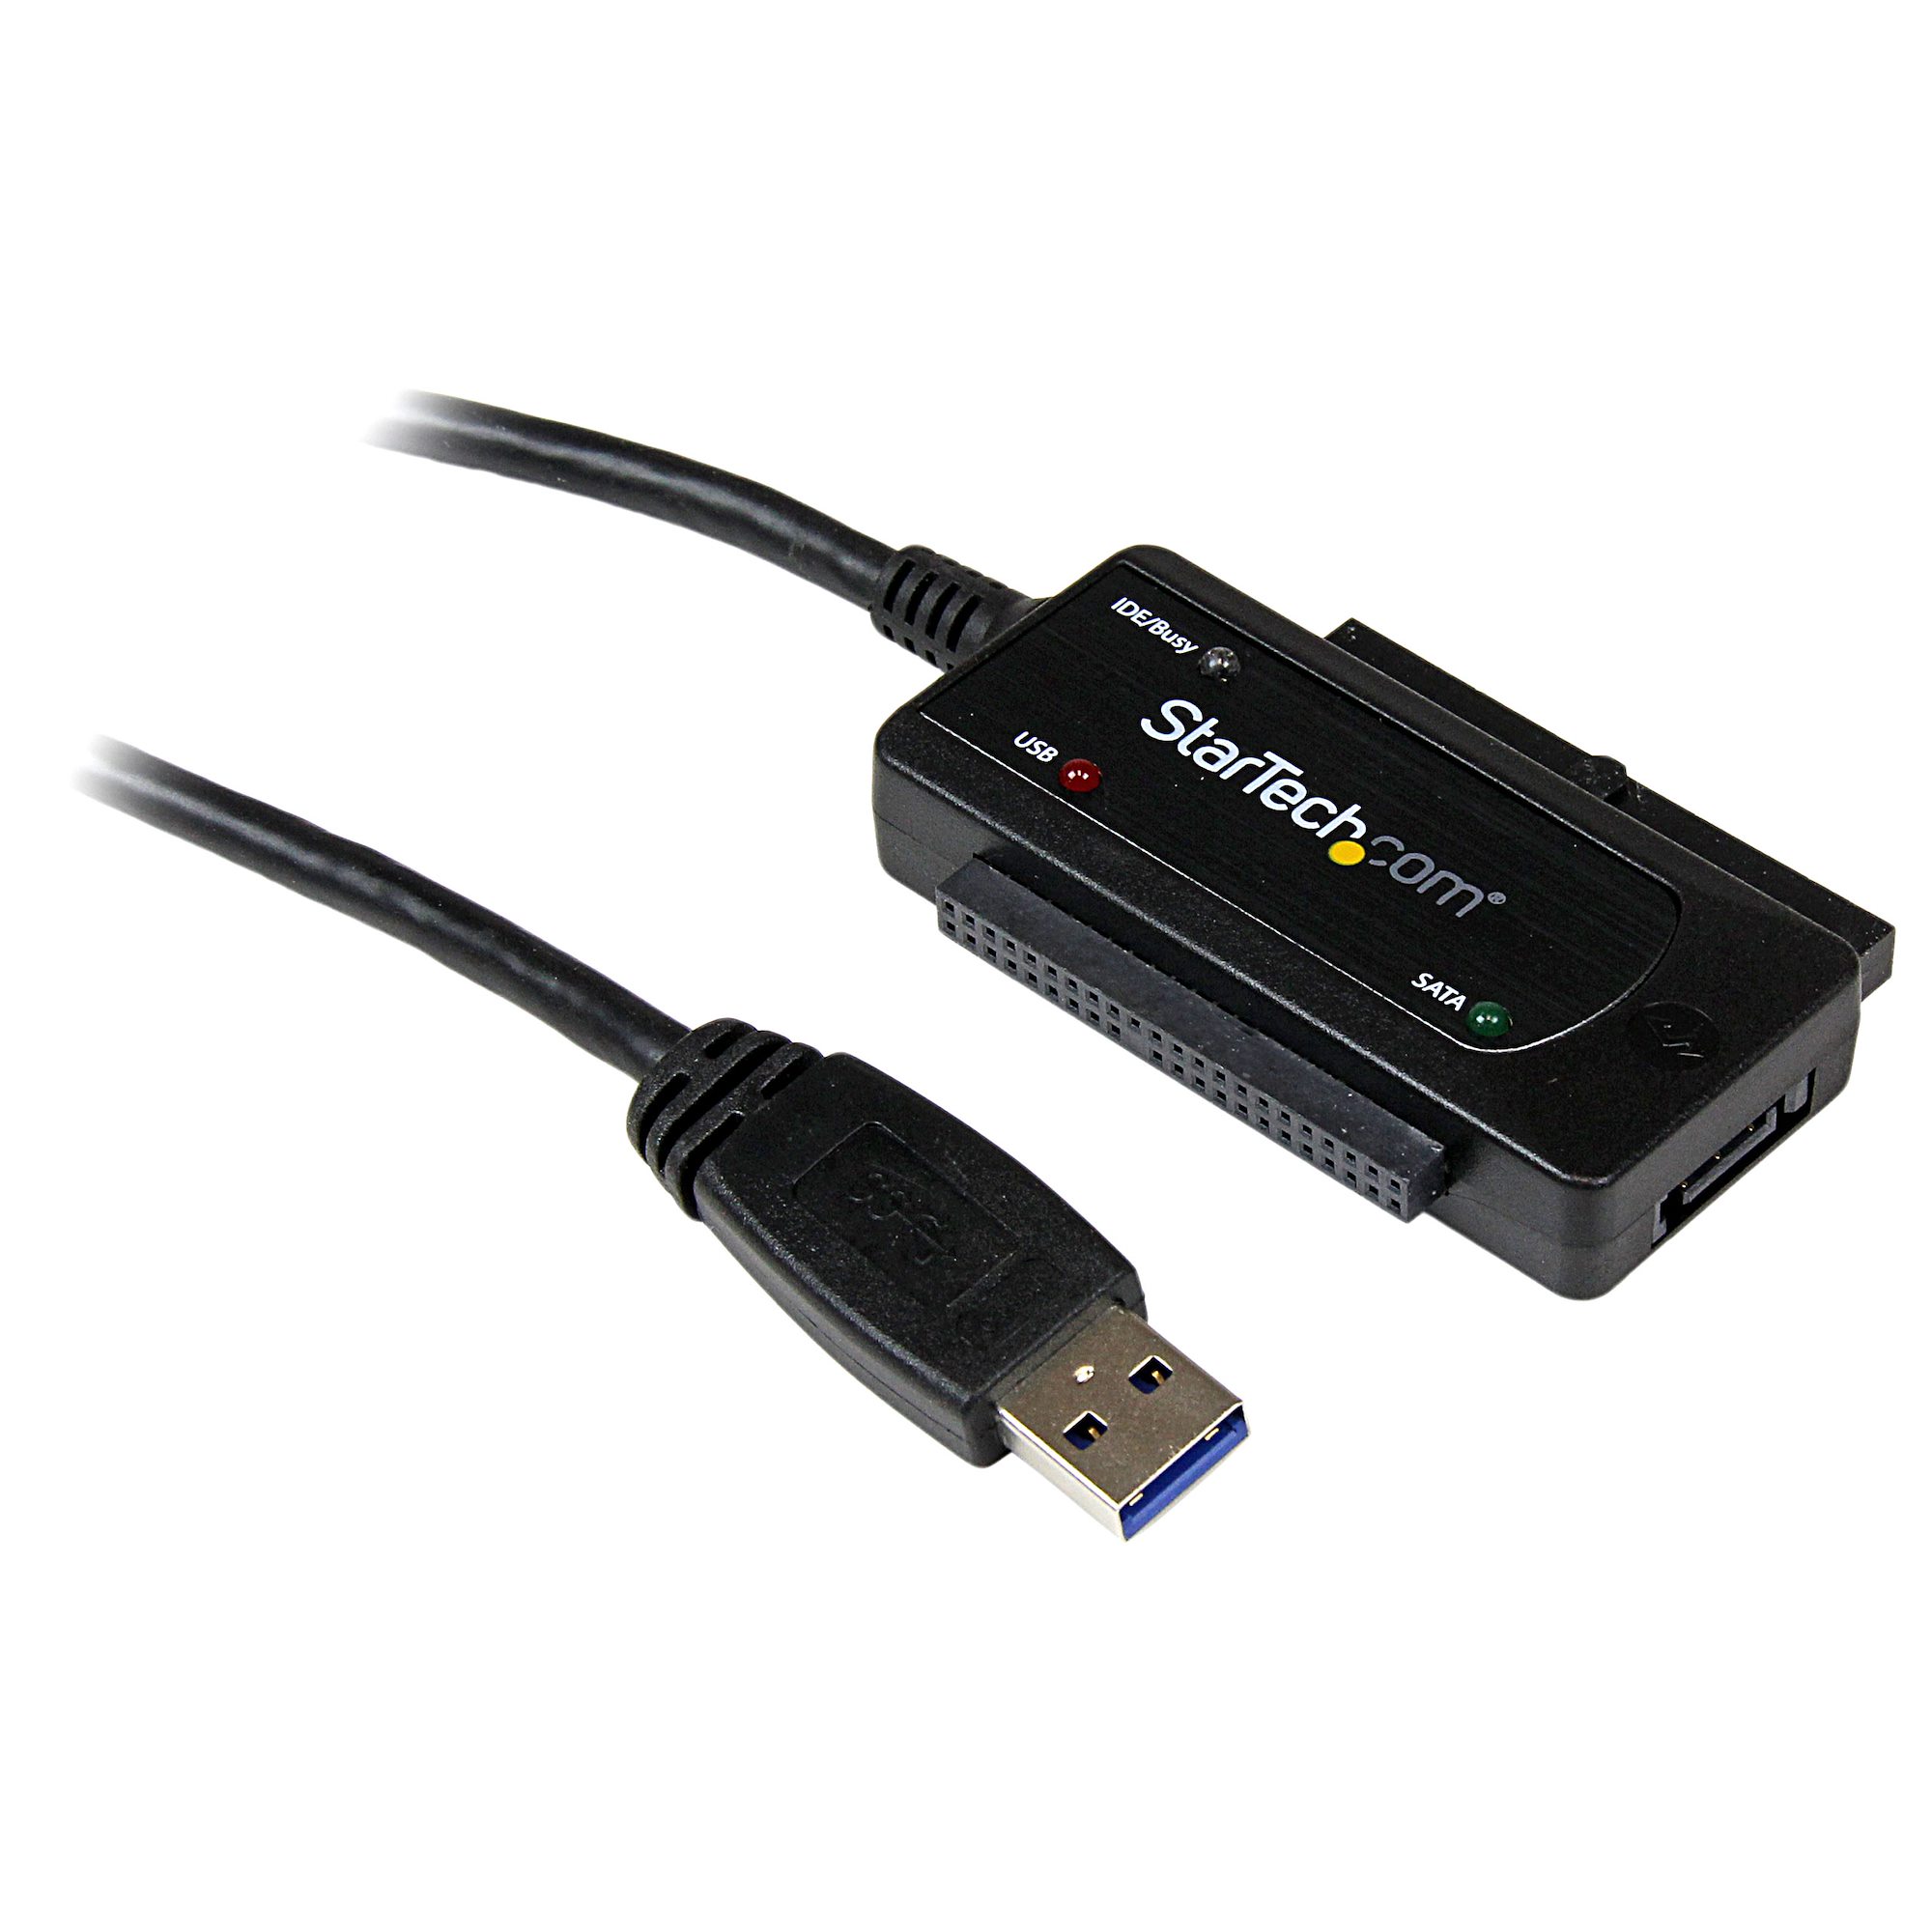 USB 3.0 to / IDE Hard Drive Adapter - Drive Adapters and Drive Converters | StarTech.com